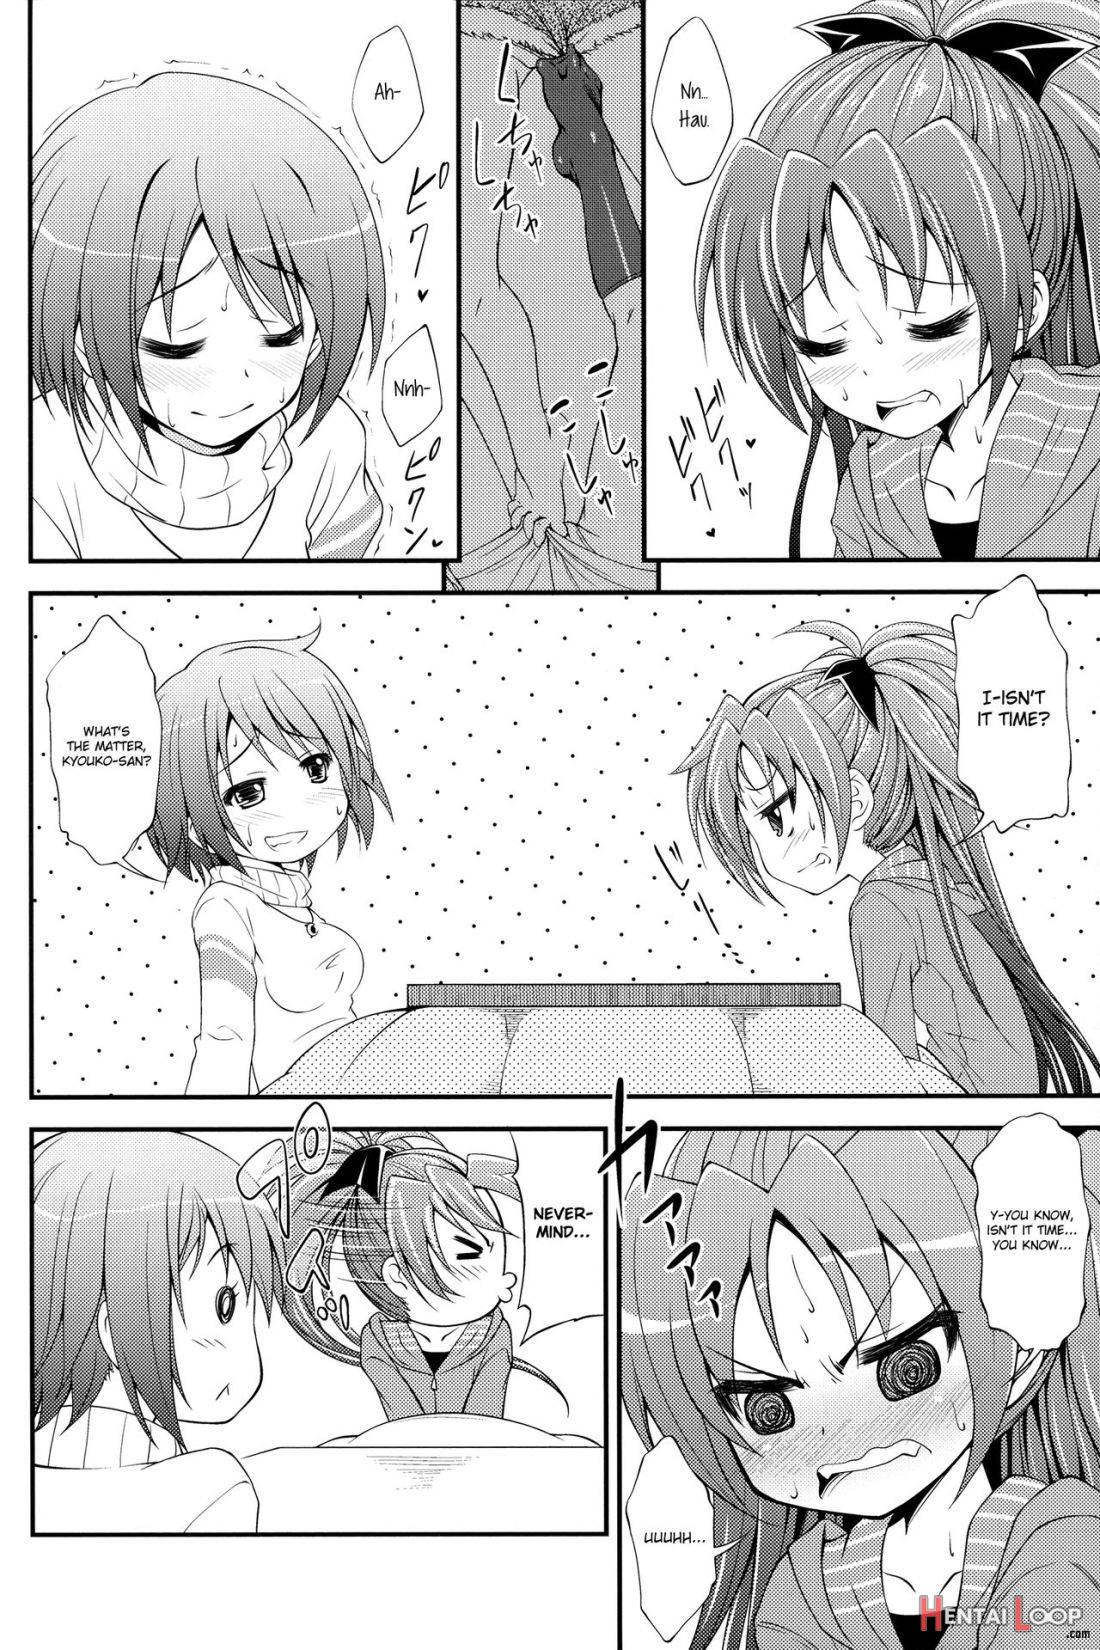 Lovely Girls’ Lily Vol.3 page 8